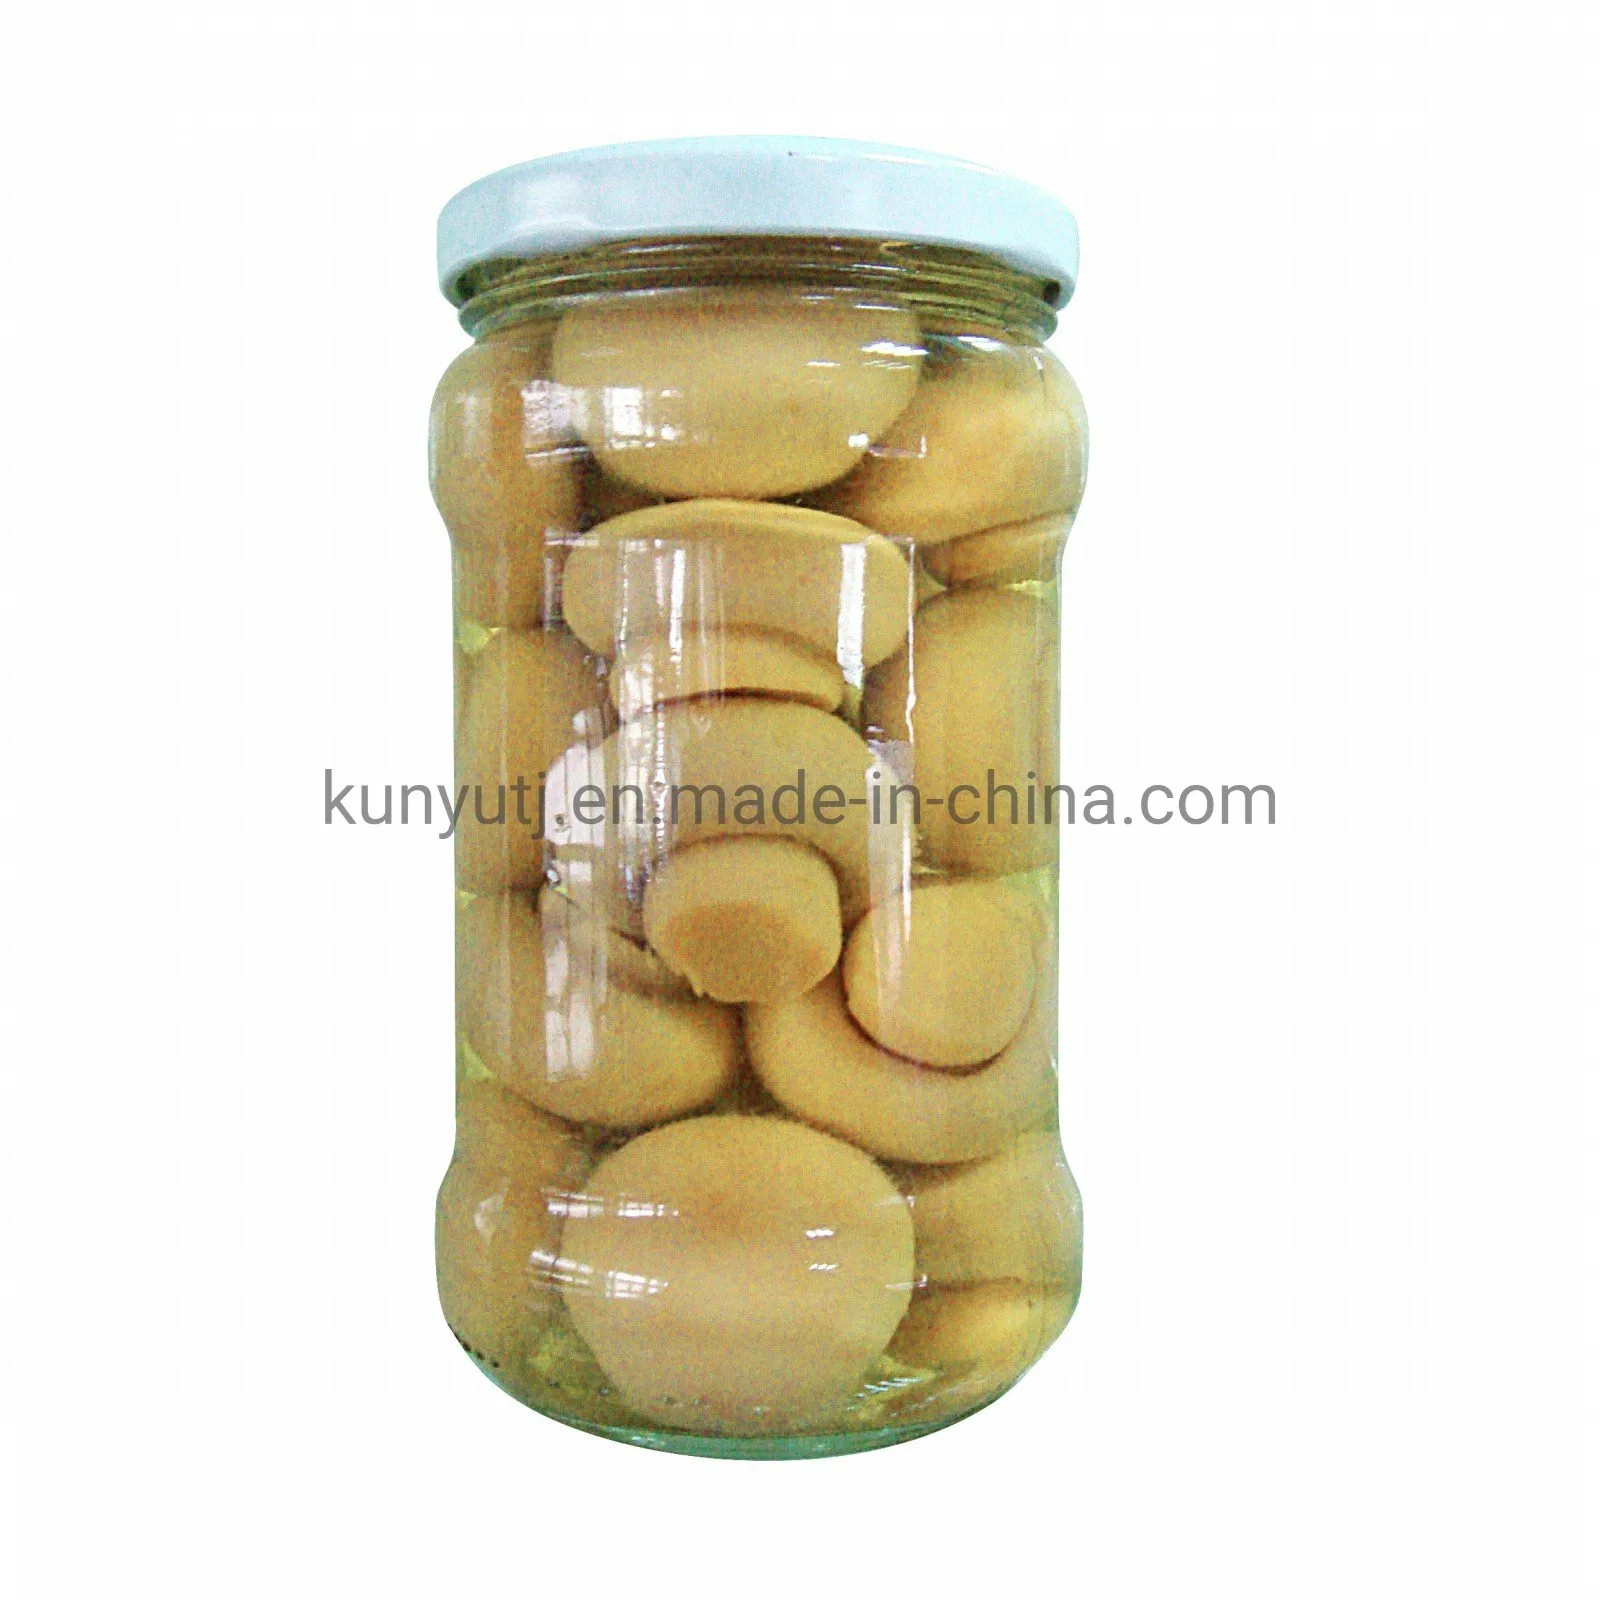 Canned Champignon Mushroom, Button Mushroom Whole 400g with OEM Brand